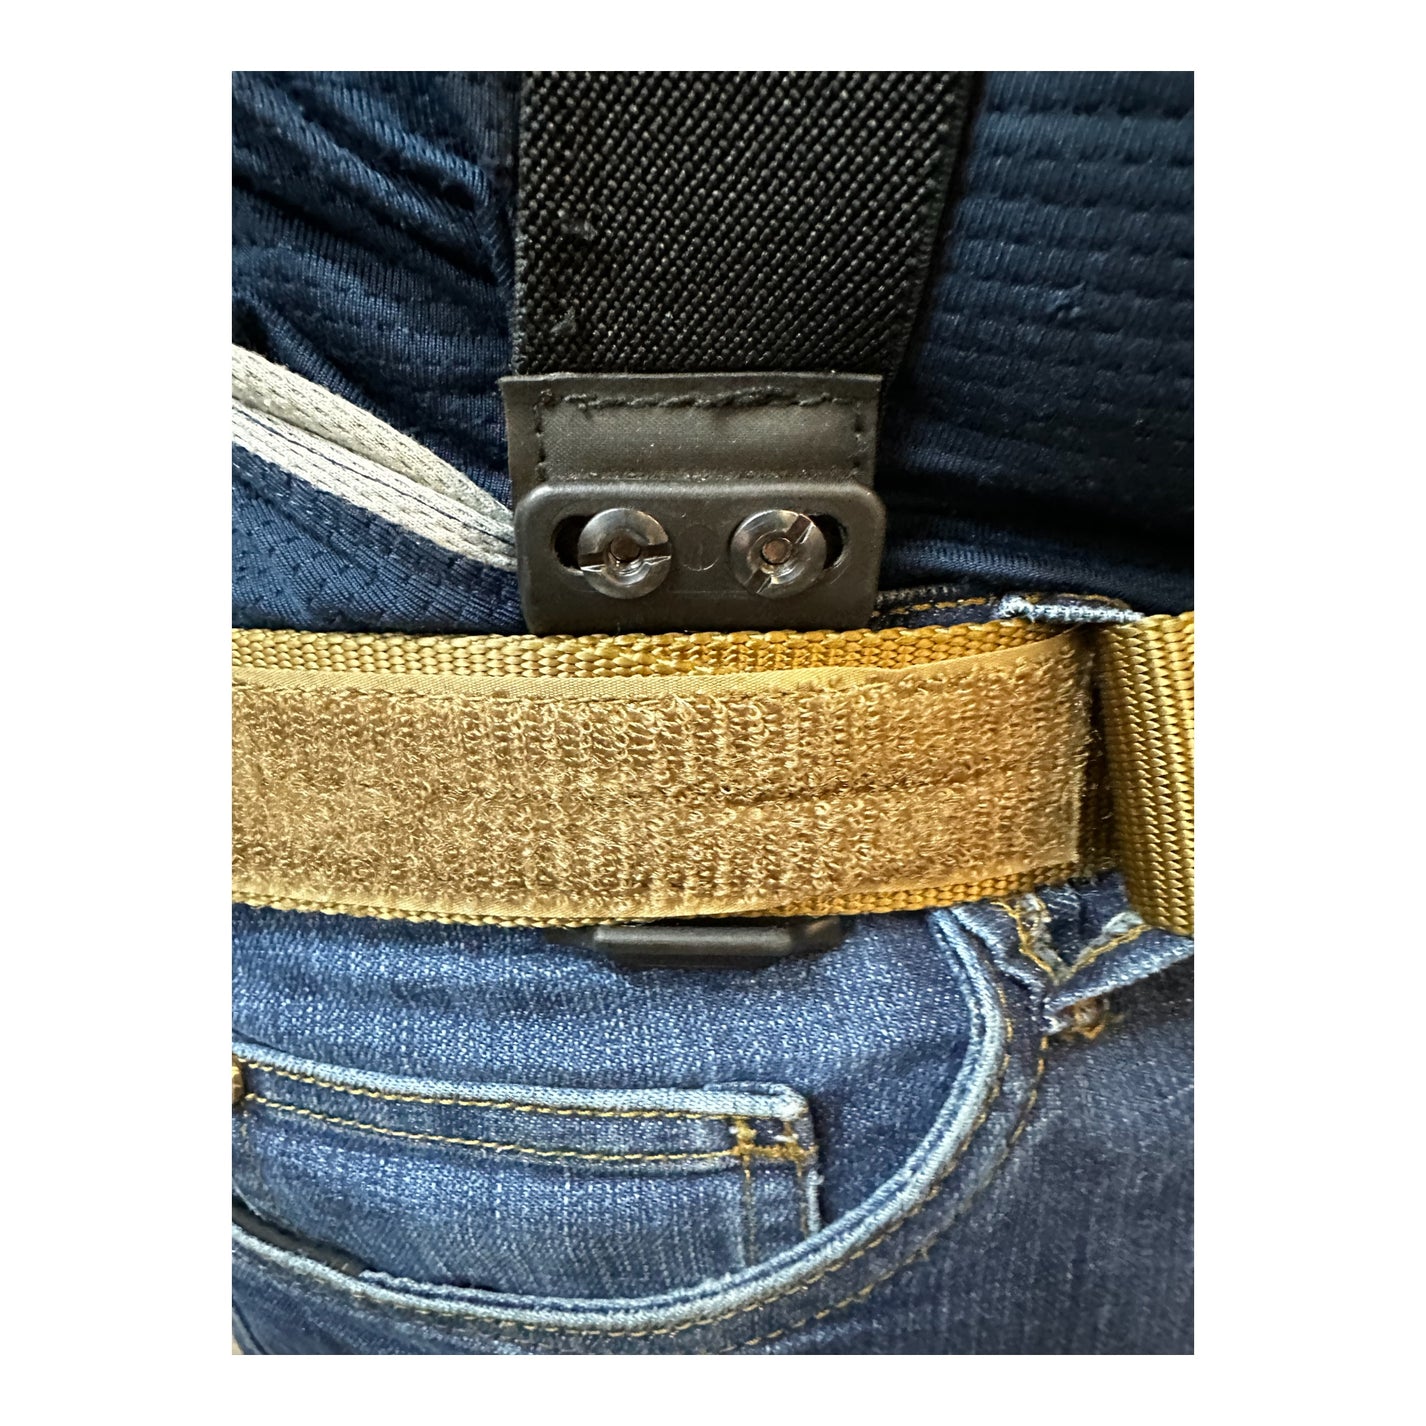 High-Performance Tactical Suspenders | T. Kell Knives